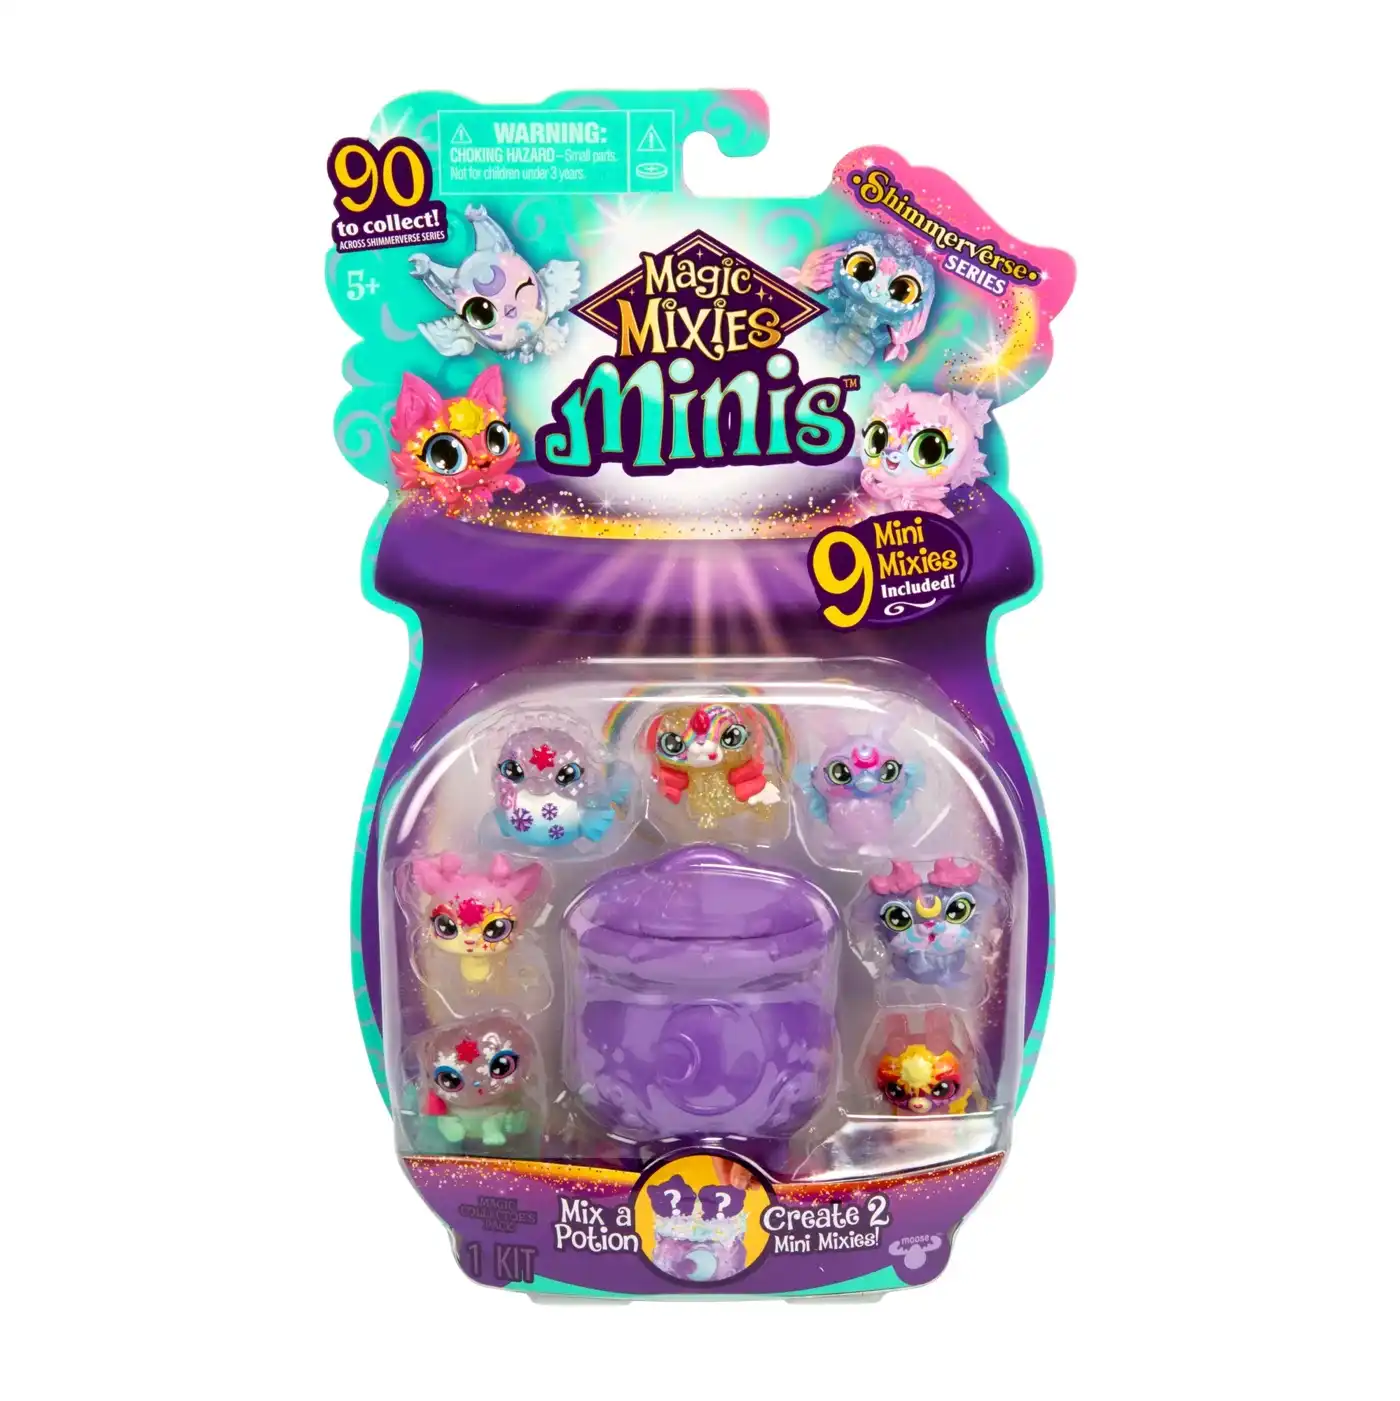 Magic Mixies Minis 9 Pack. Assorted